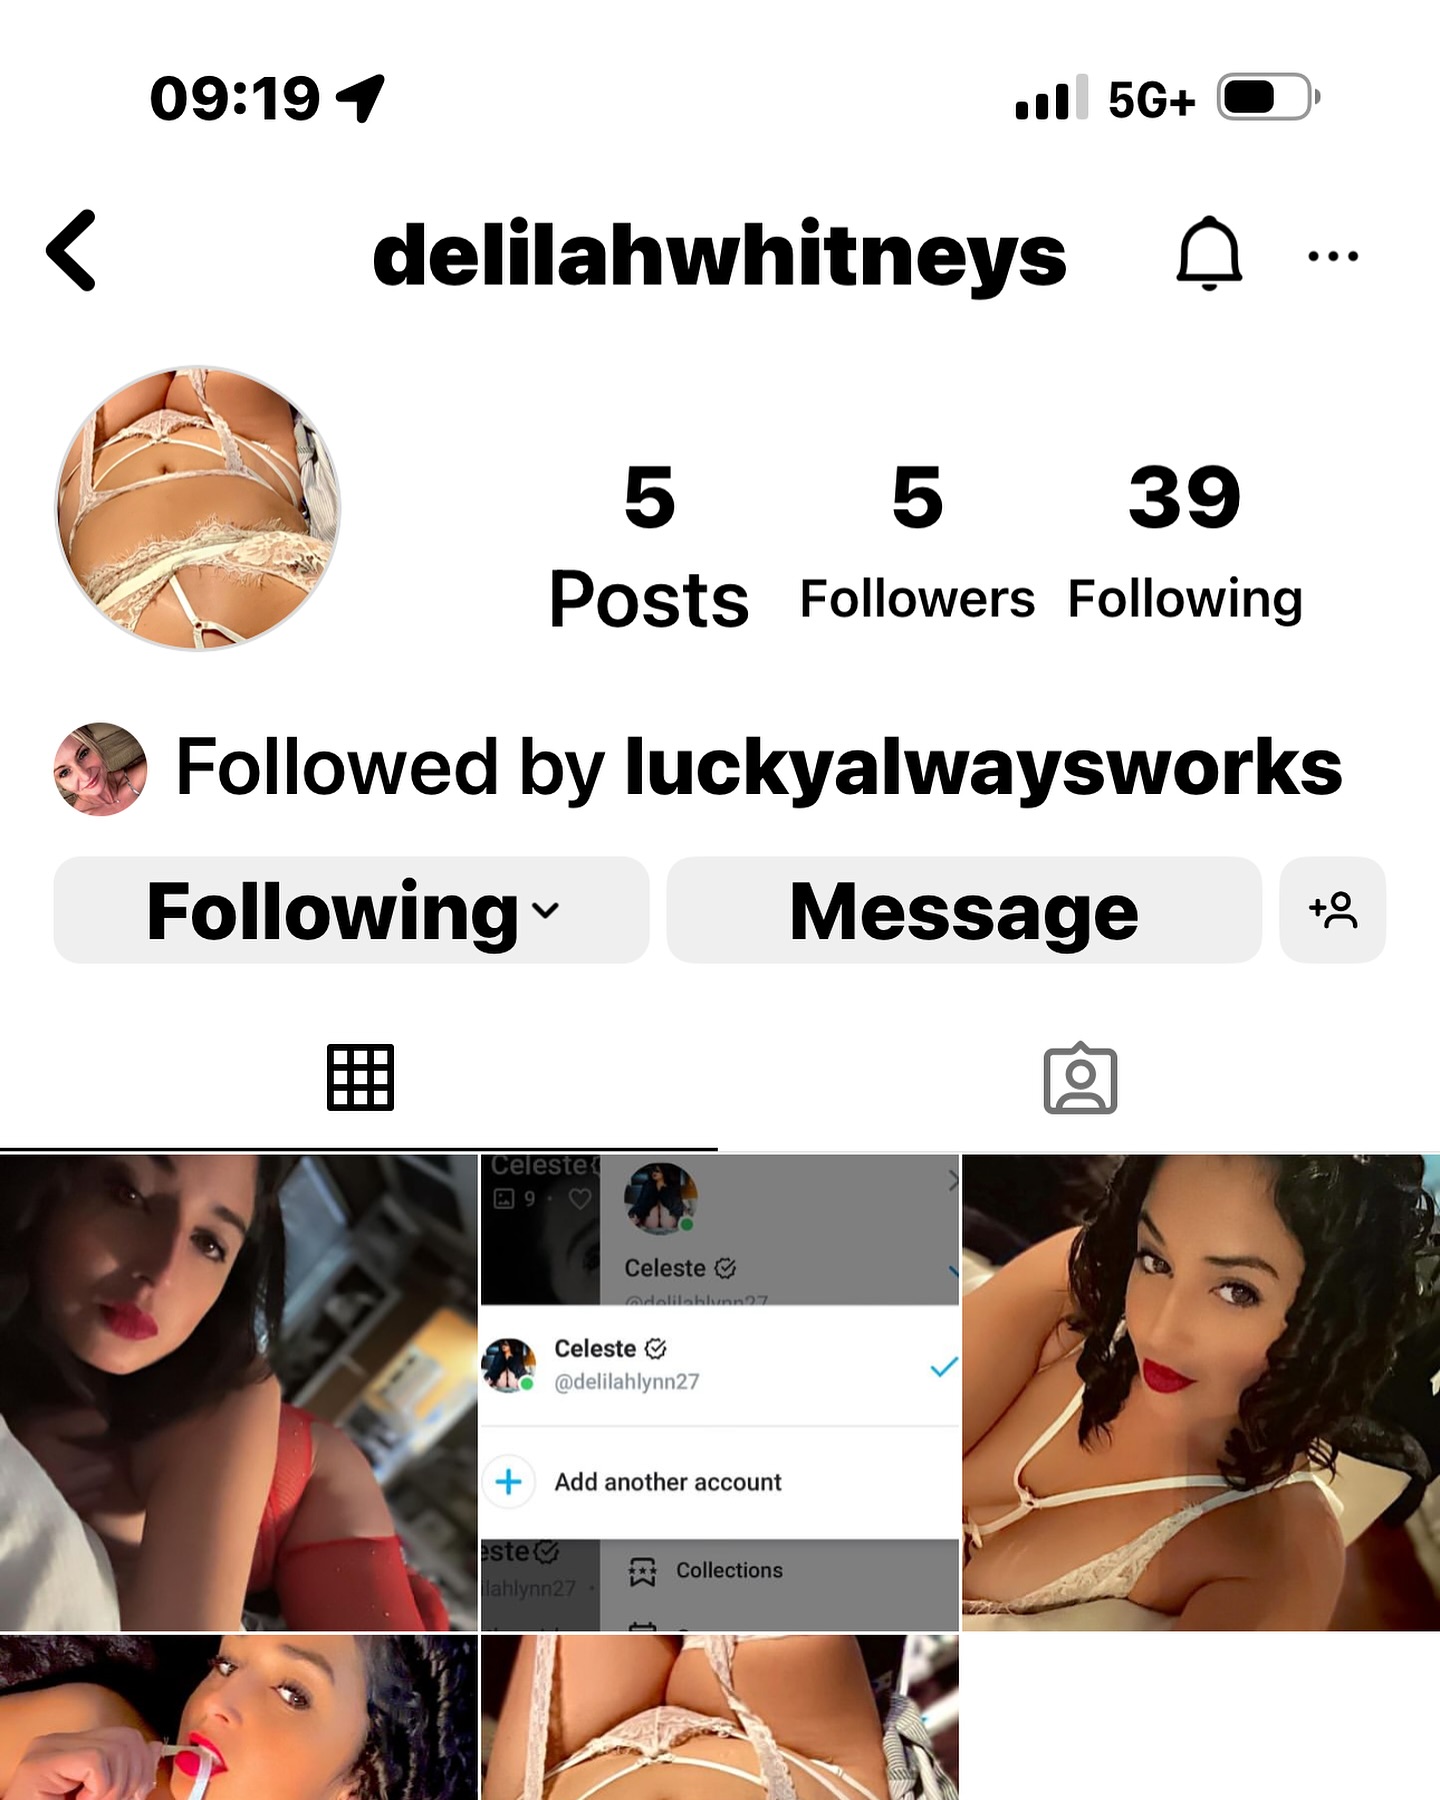 Follow my girl @delilahwhitneys and be ready for some exciting new content  coming soon!